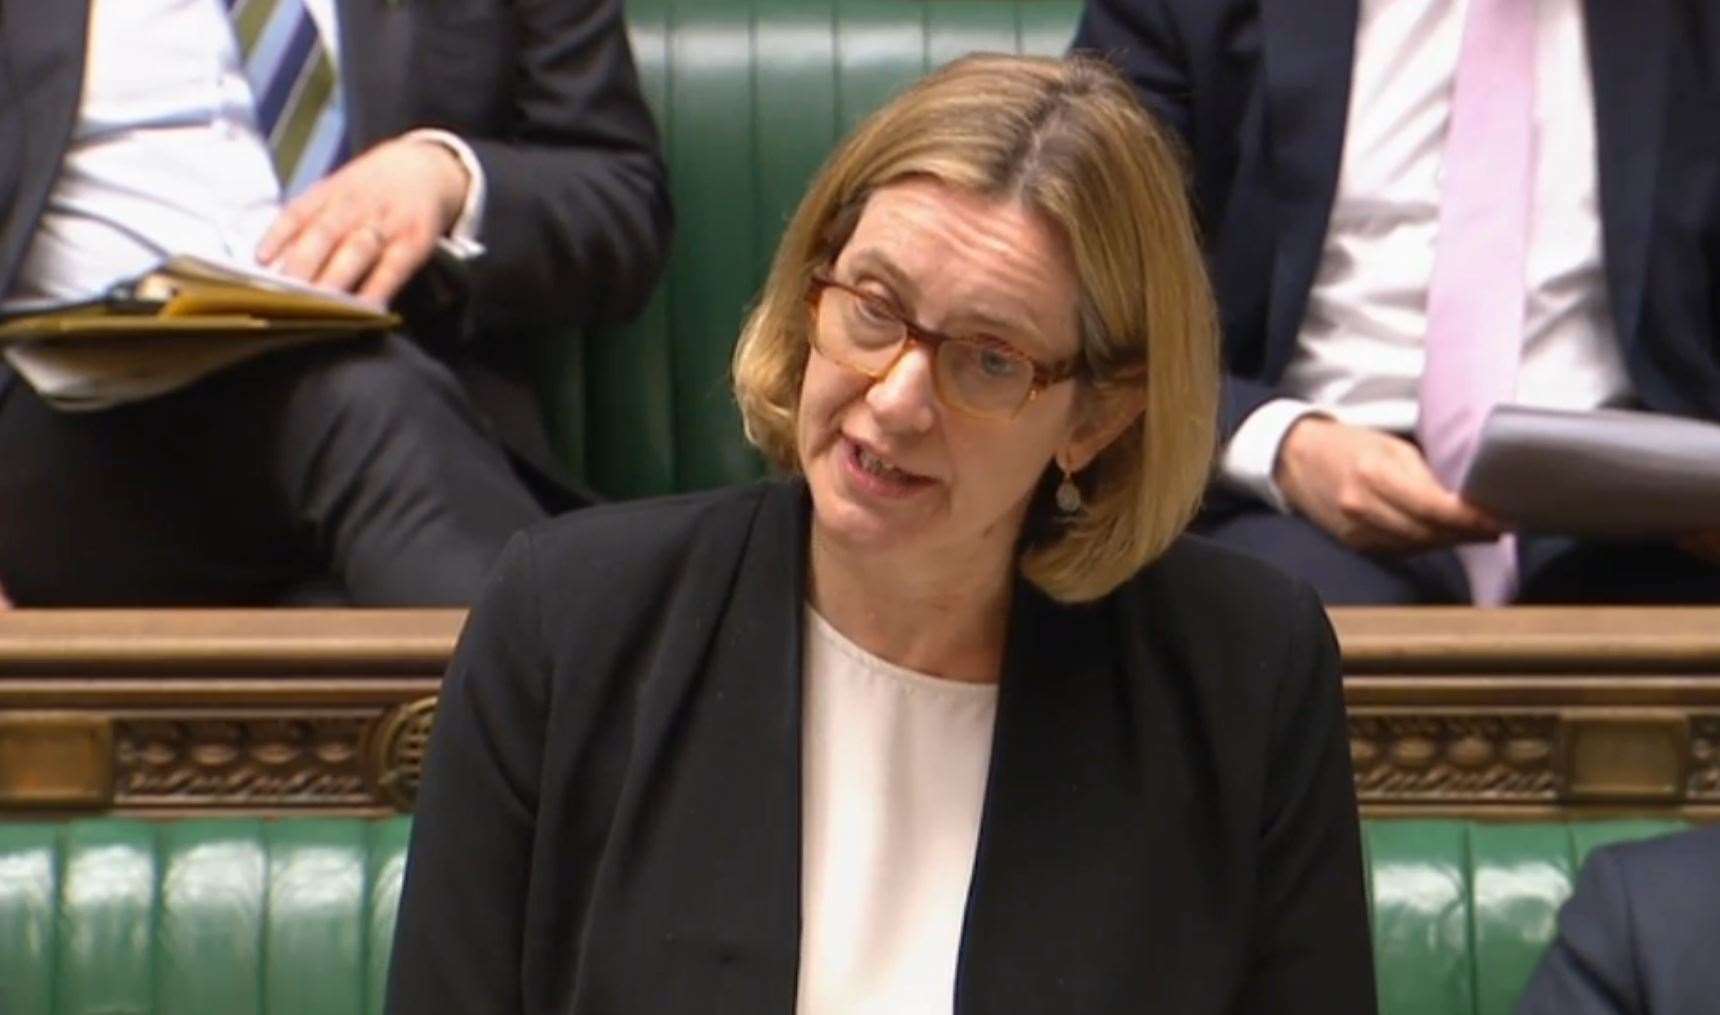 Home Secretary Amber Rudd makes the Windrush statement in the Houses of Parliament in April 2018 (PA)